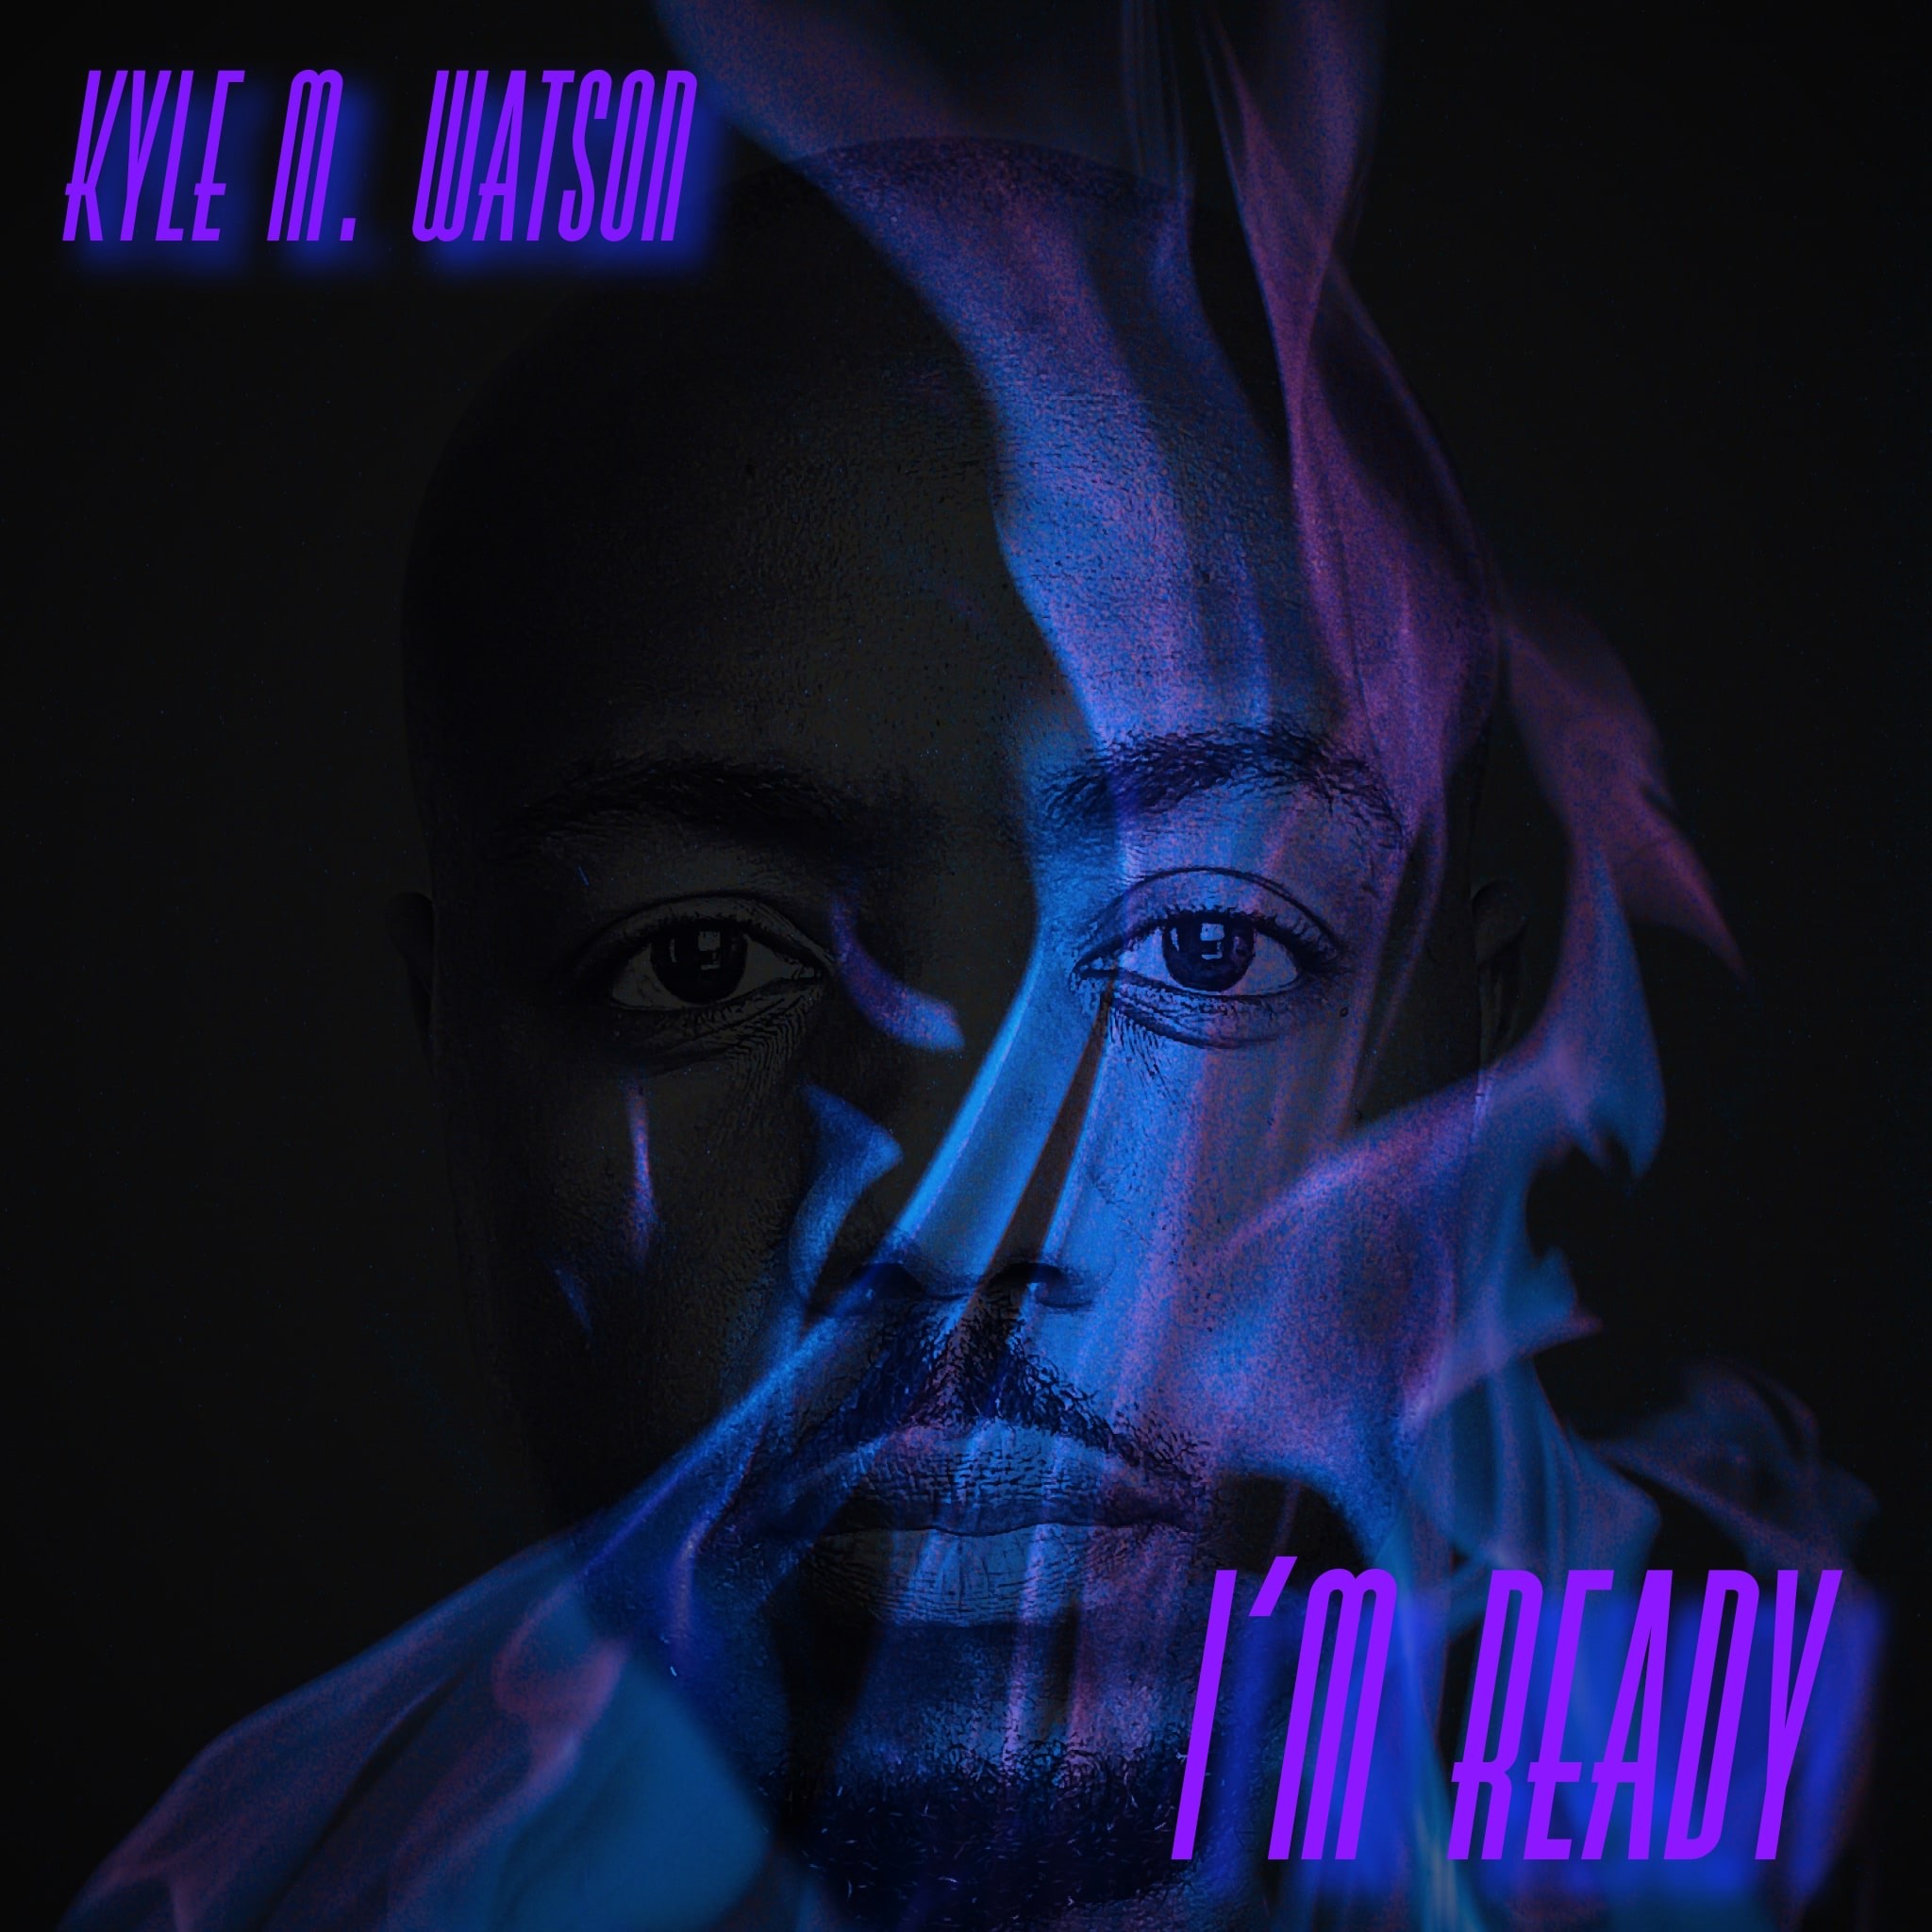 Art for I'm Ready by Kyle M Watson